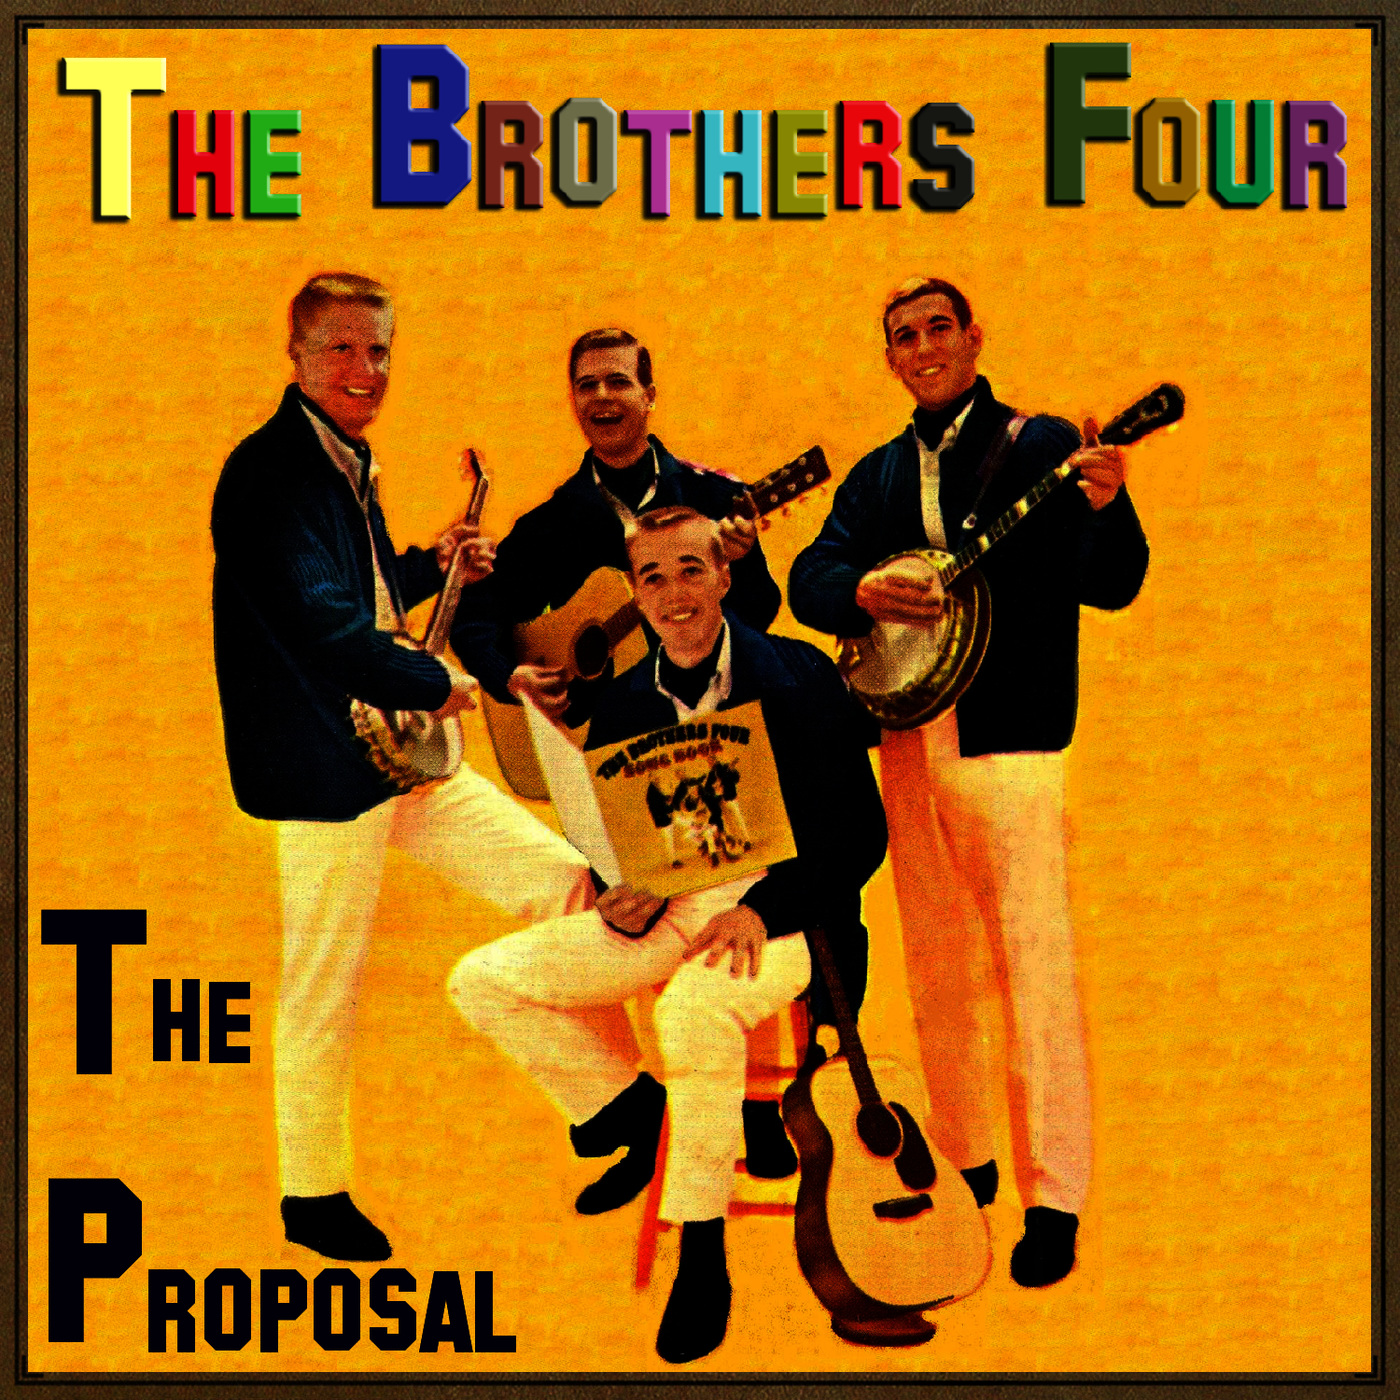 Песни 4 брата. The brothers four Greenfields. The brothers four Википедия. Brother картинка. The brothers four foto.